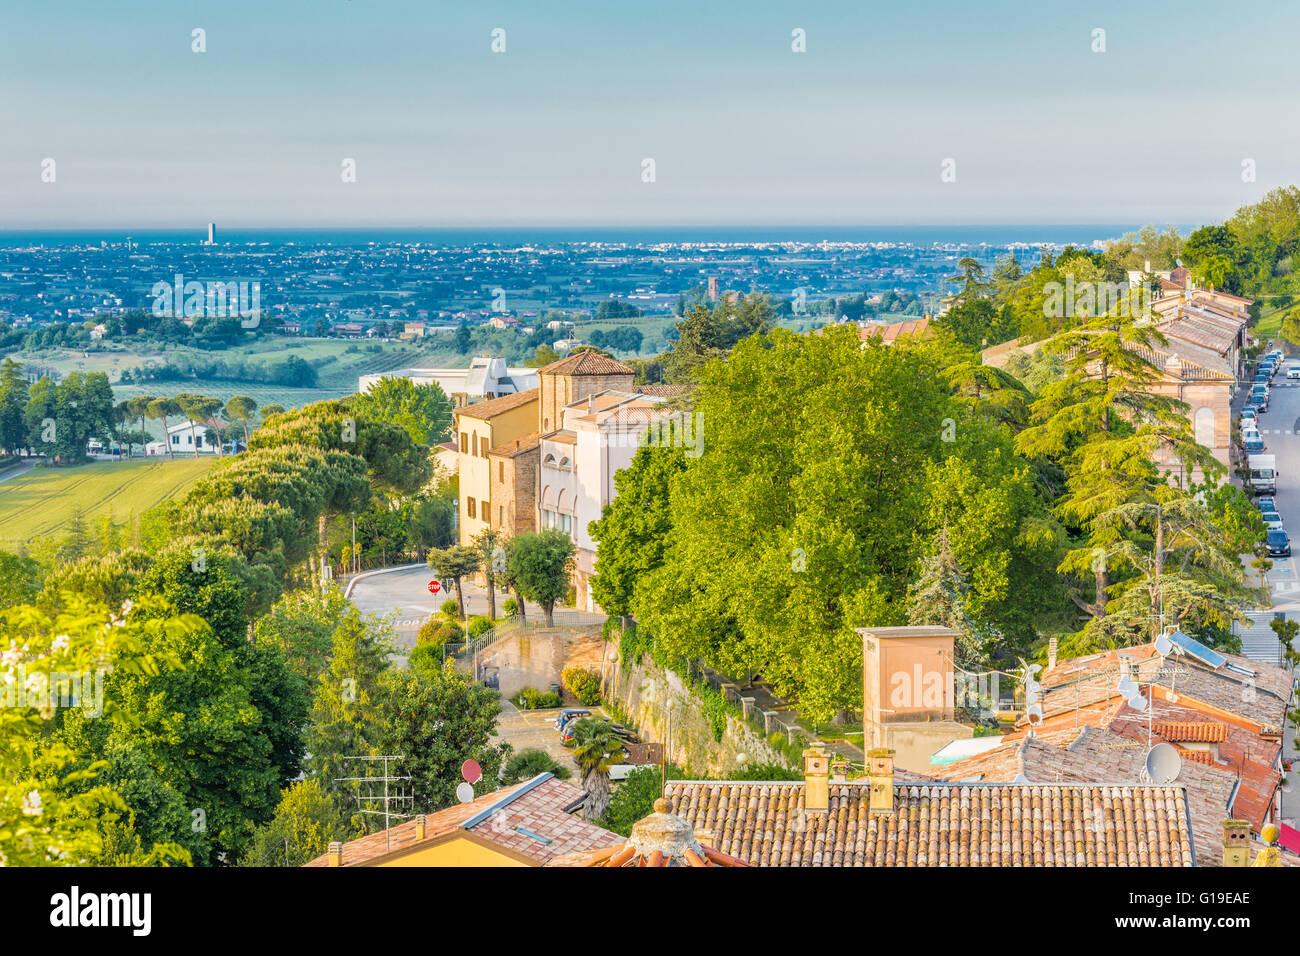 Panorama of the medieval village of Longiano in the Romagna hills near Cesena in Italy, with its ancient buildings and the sea in the distance on the horizon Stock Photo